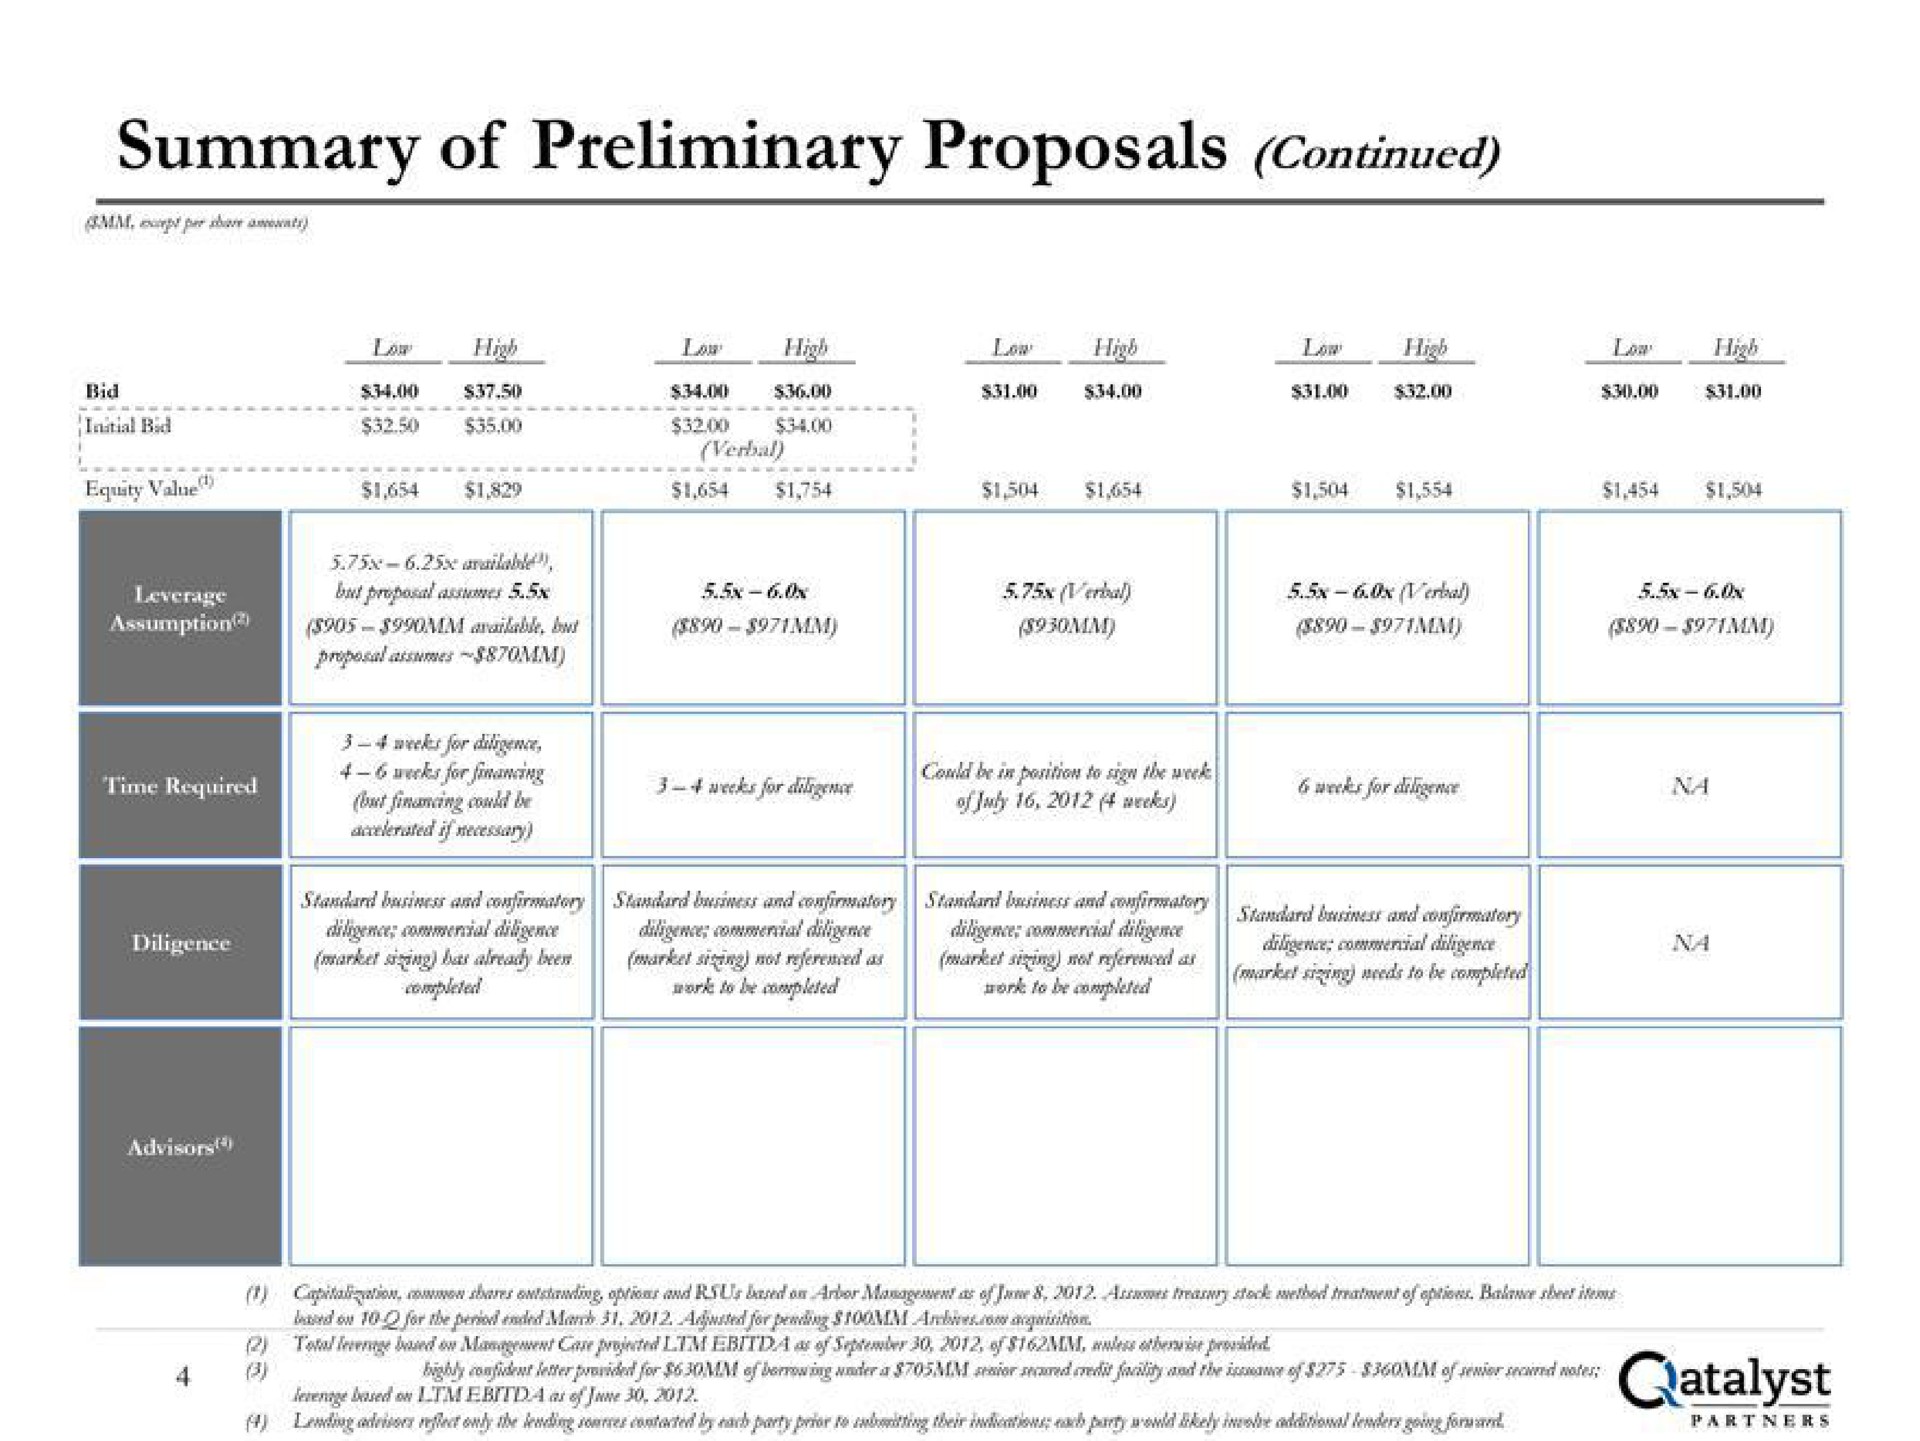 summary of preliminary proposals continued | Qatalyst Partners